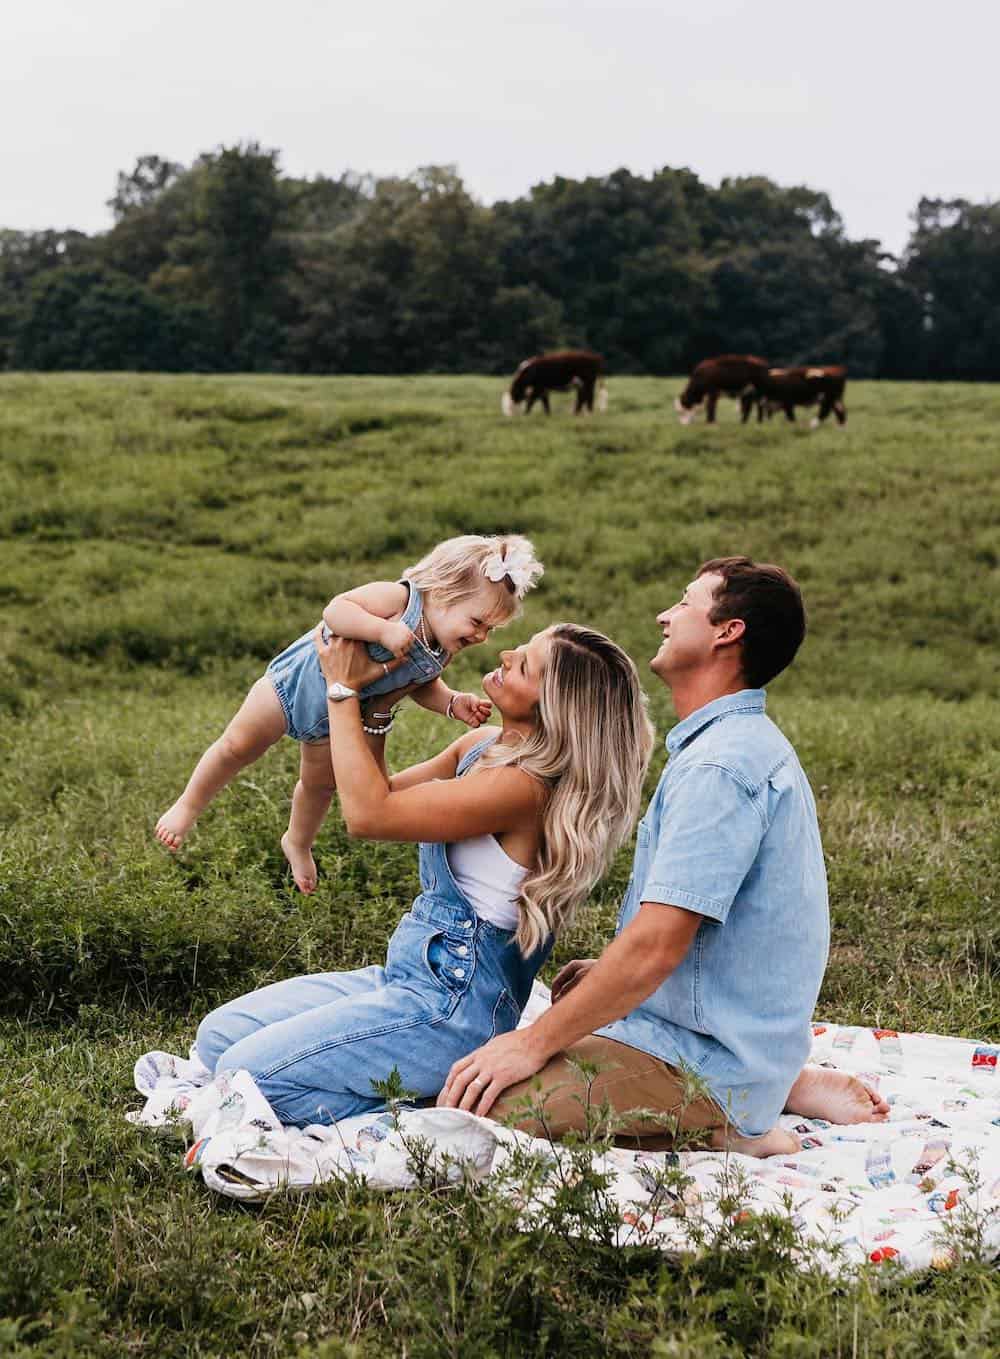 a summer family photo shoot with a mom, dad, and baby girl wearing casual denim pieces like overalls, rompers, and shirts